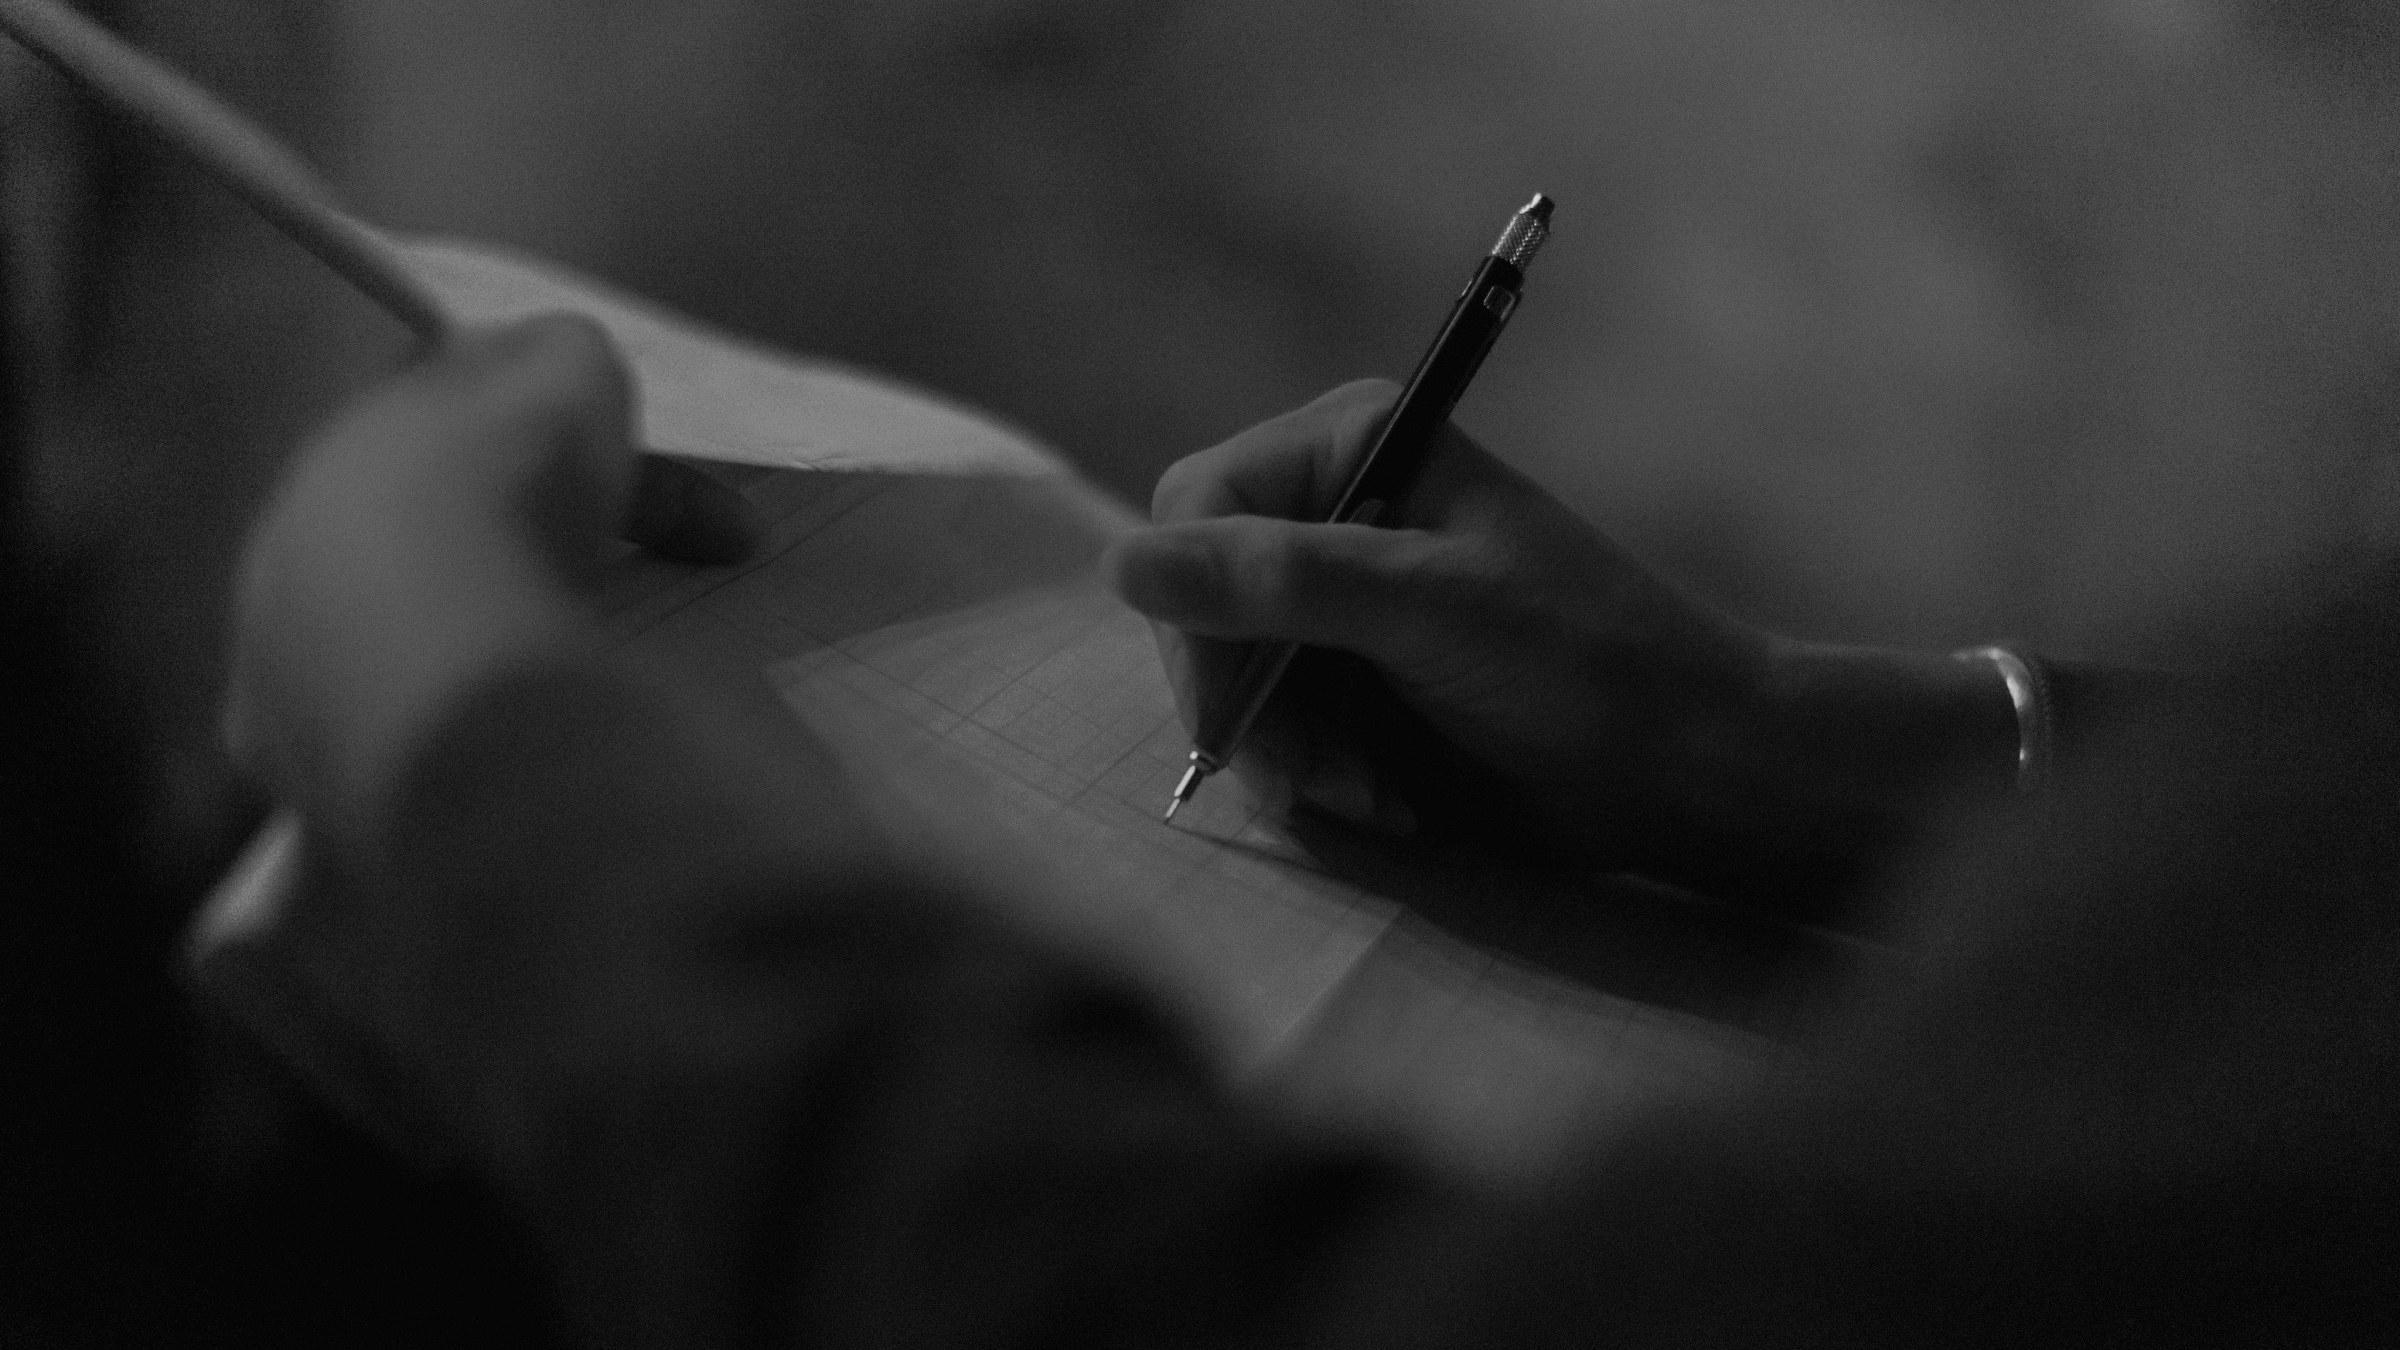 Close up of a hand holding a pen and writing on paper in a darkened room.